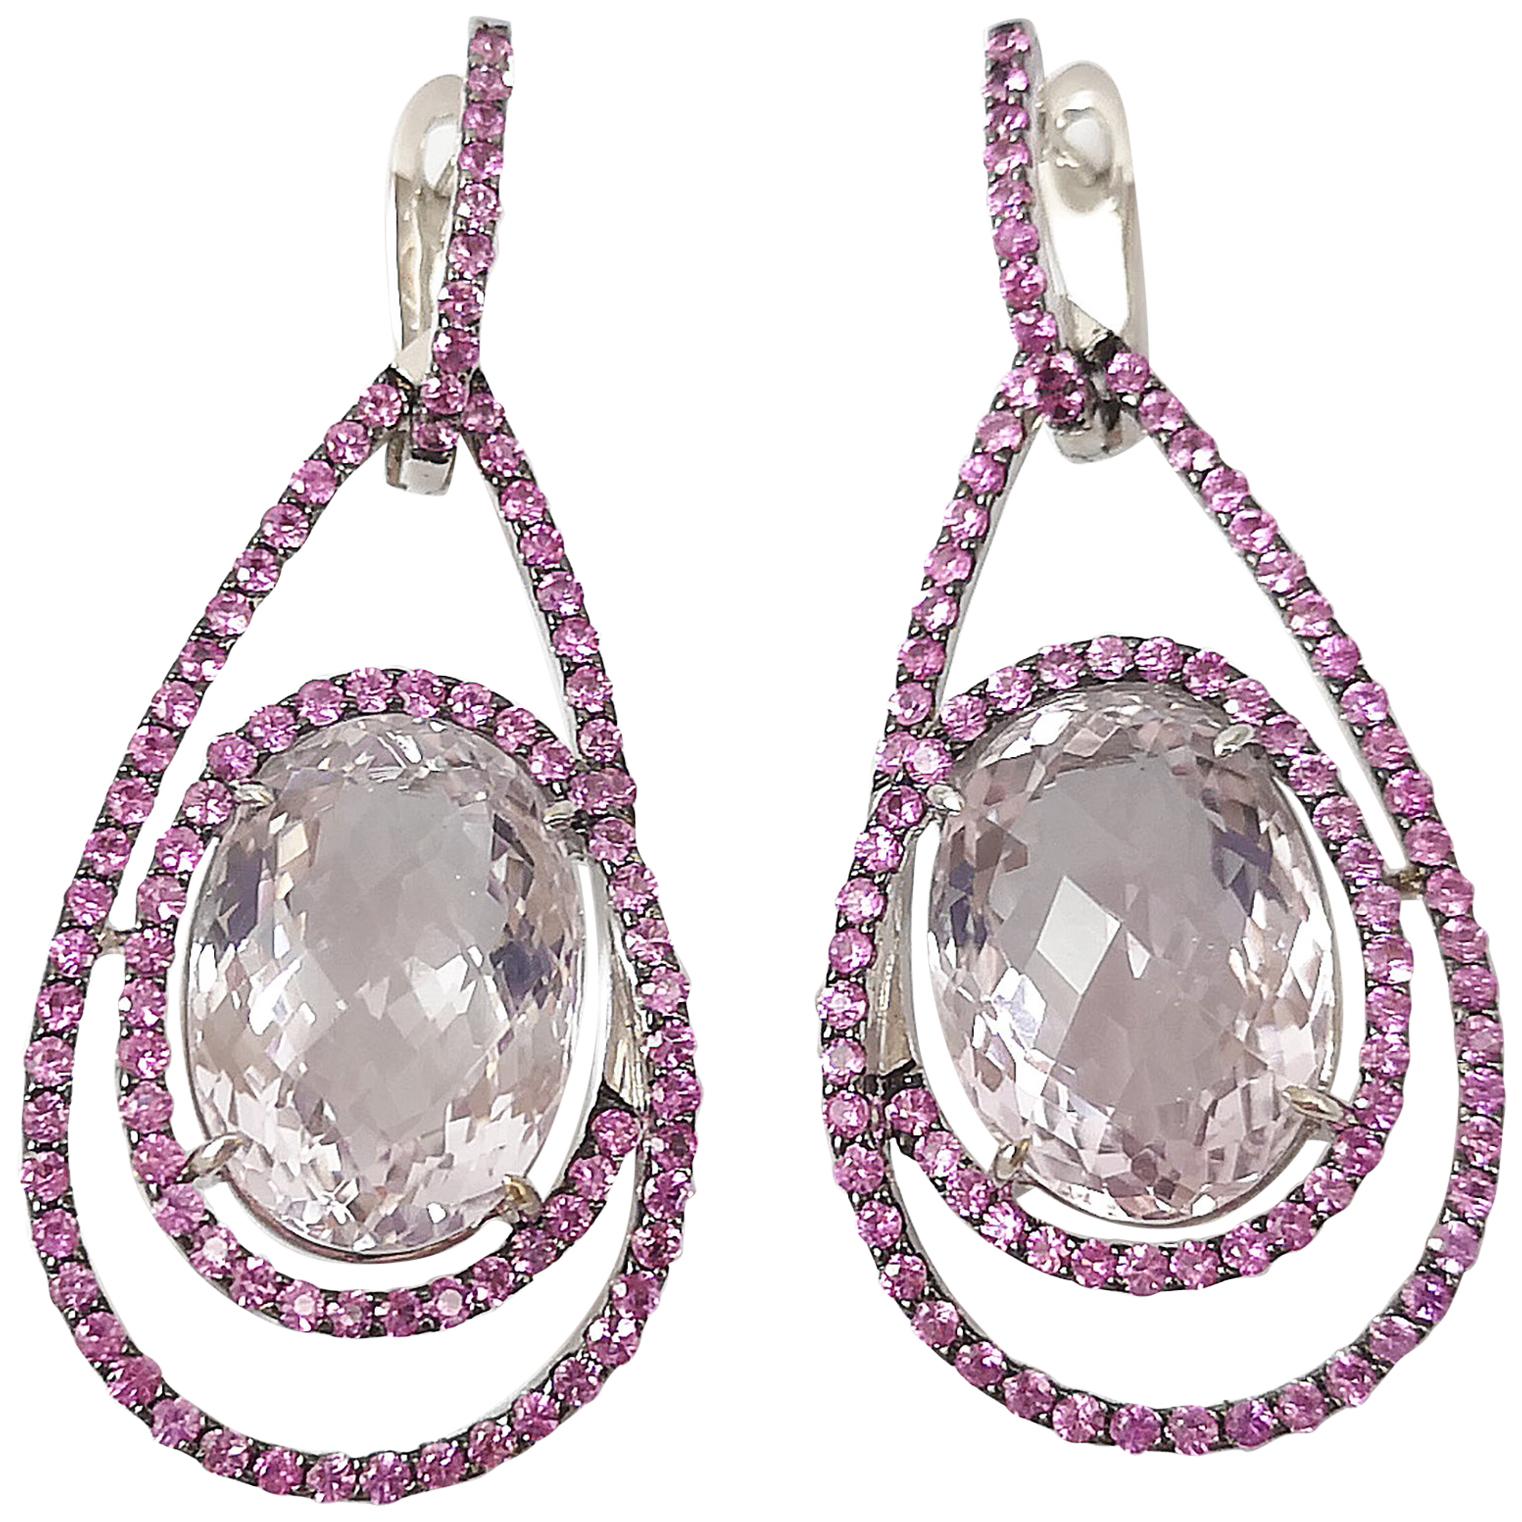 Pink Amethyst with Pink Sapphire Earrings Set in 18 Karat White Gold Settings